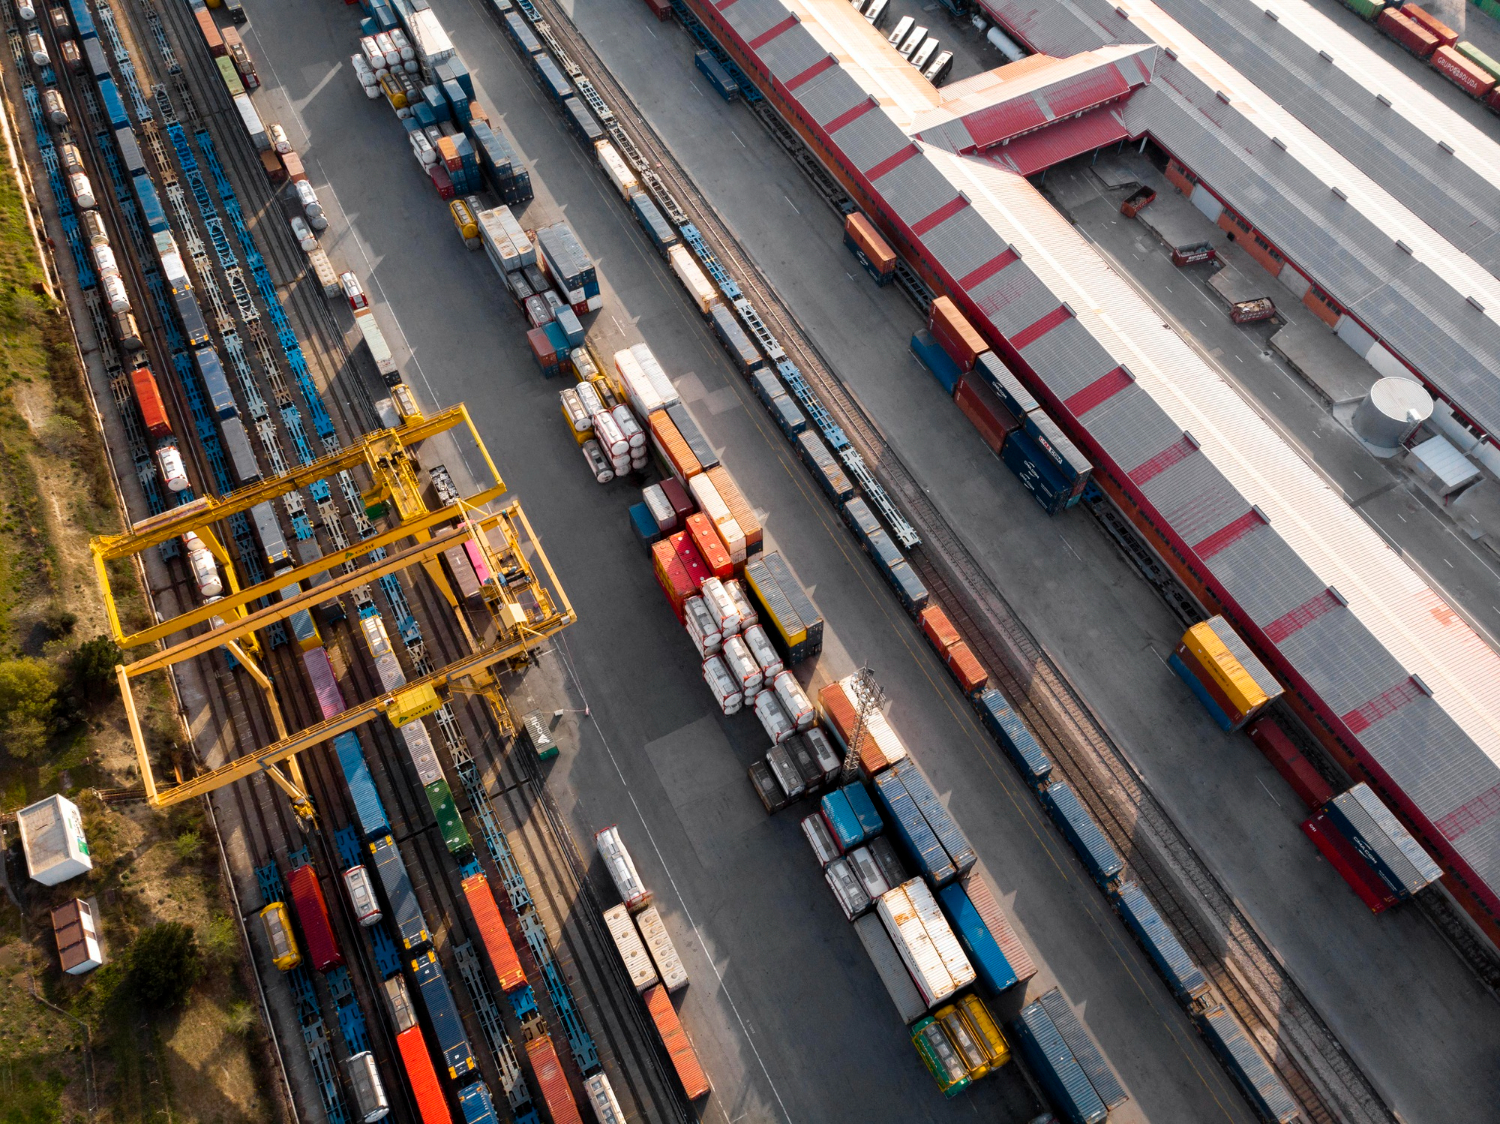 containers-railways-aerial-views